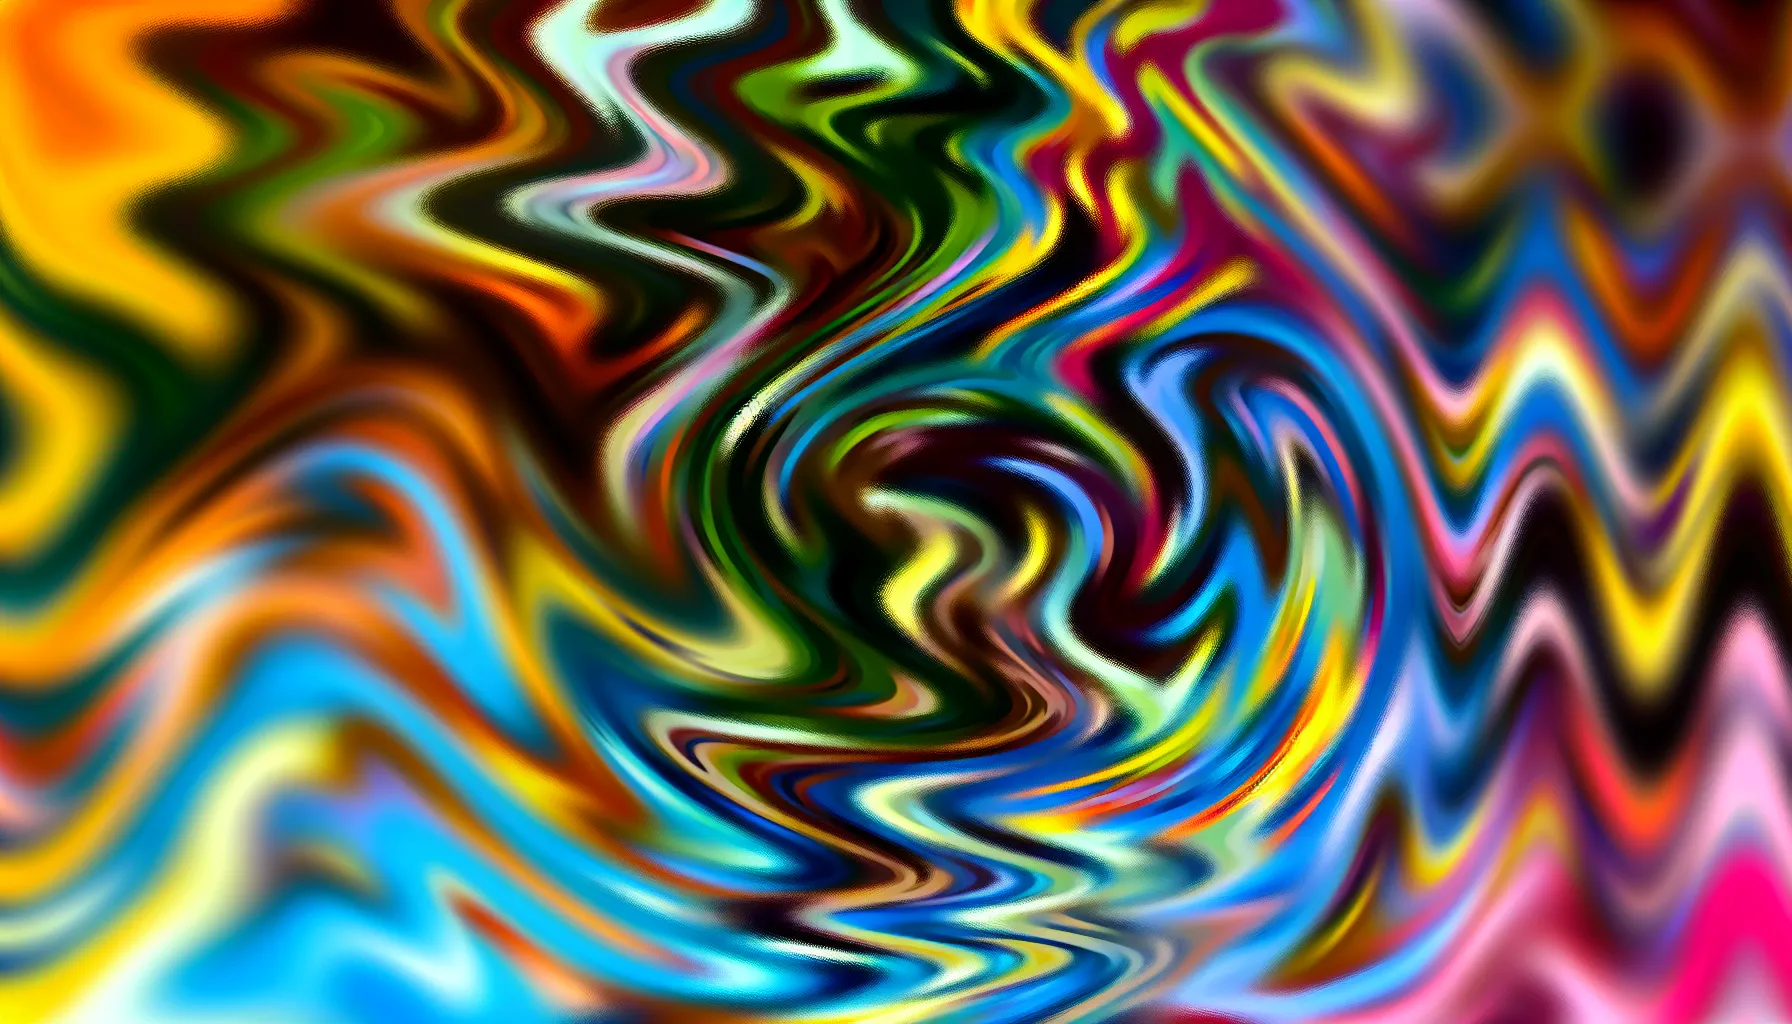 Abstract colorful image symbolizing excitement and adventure